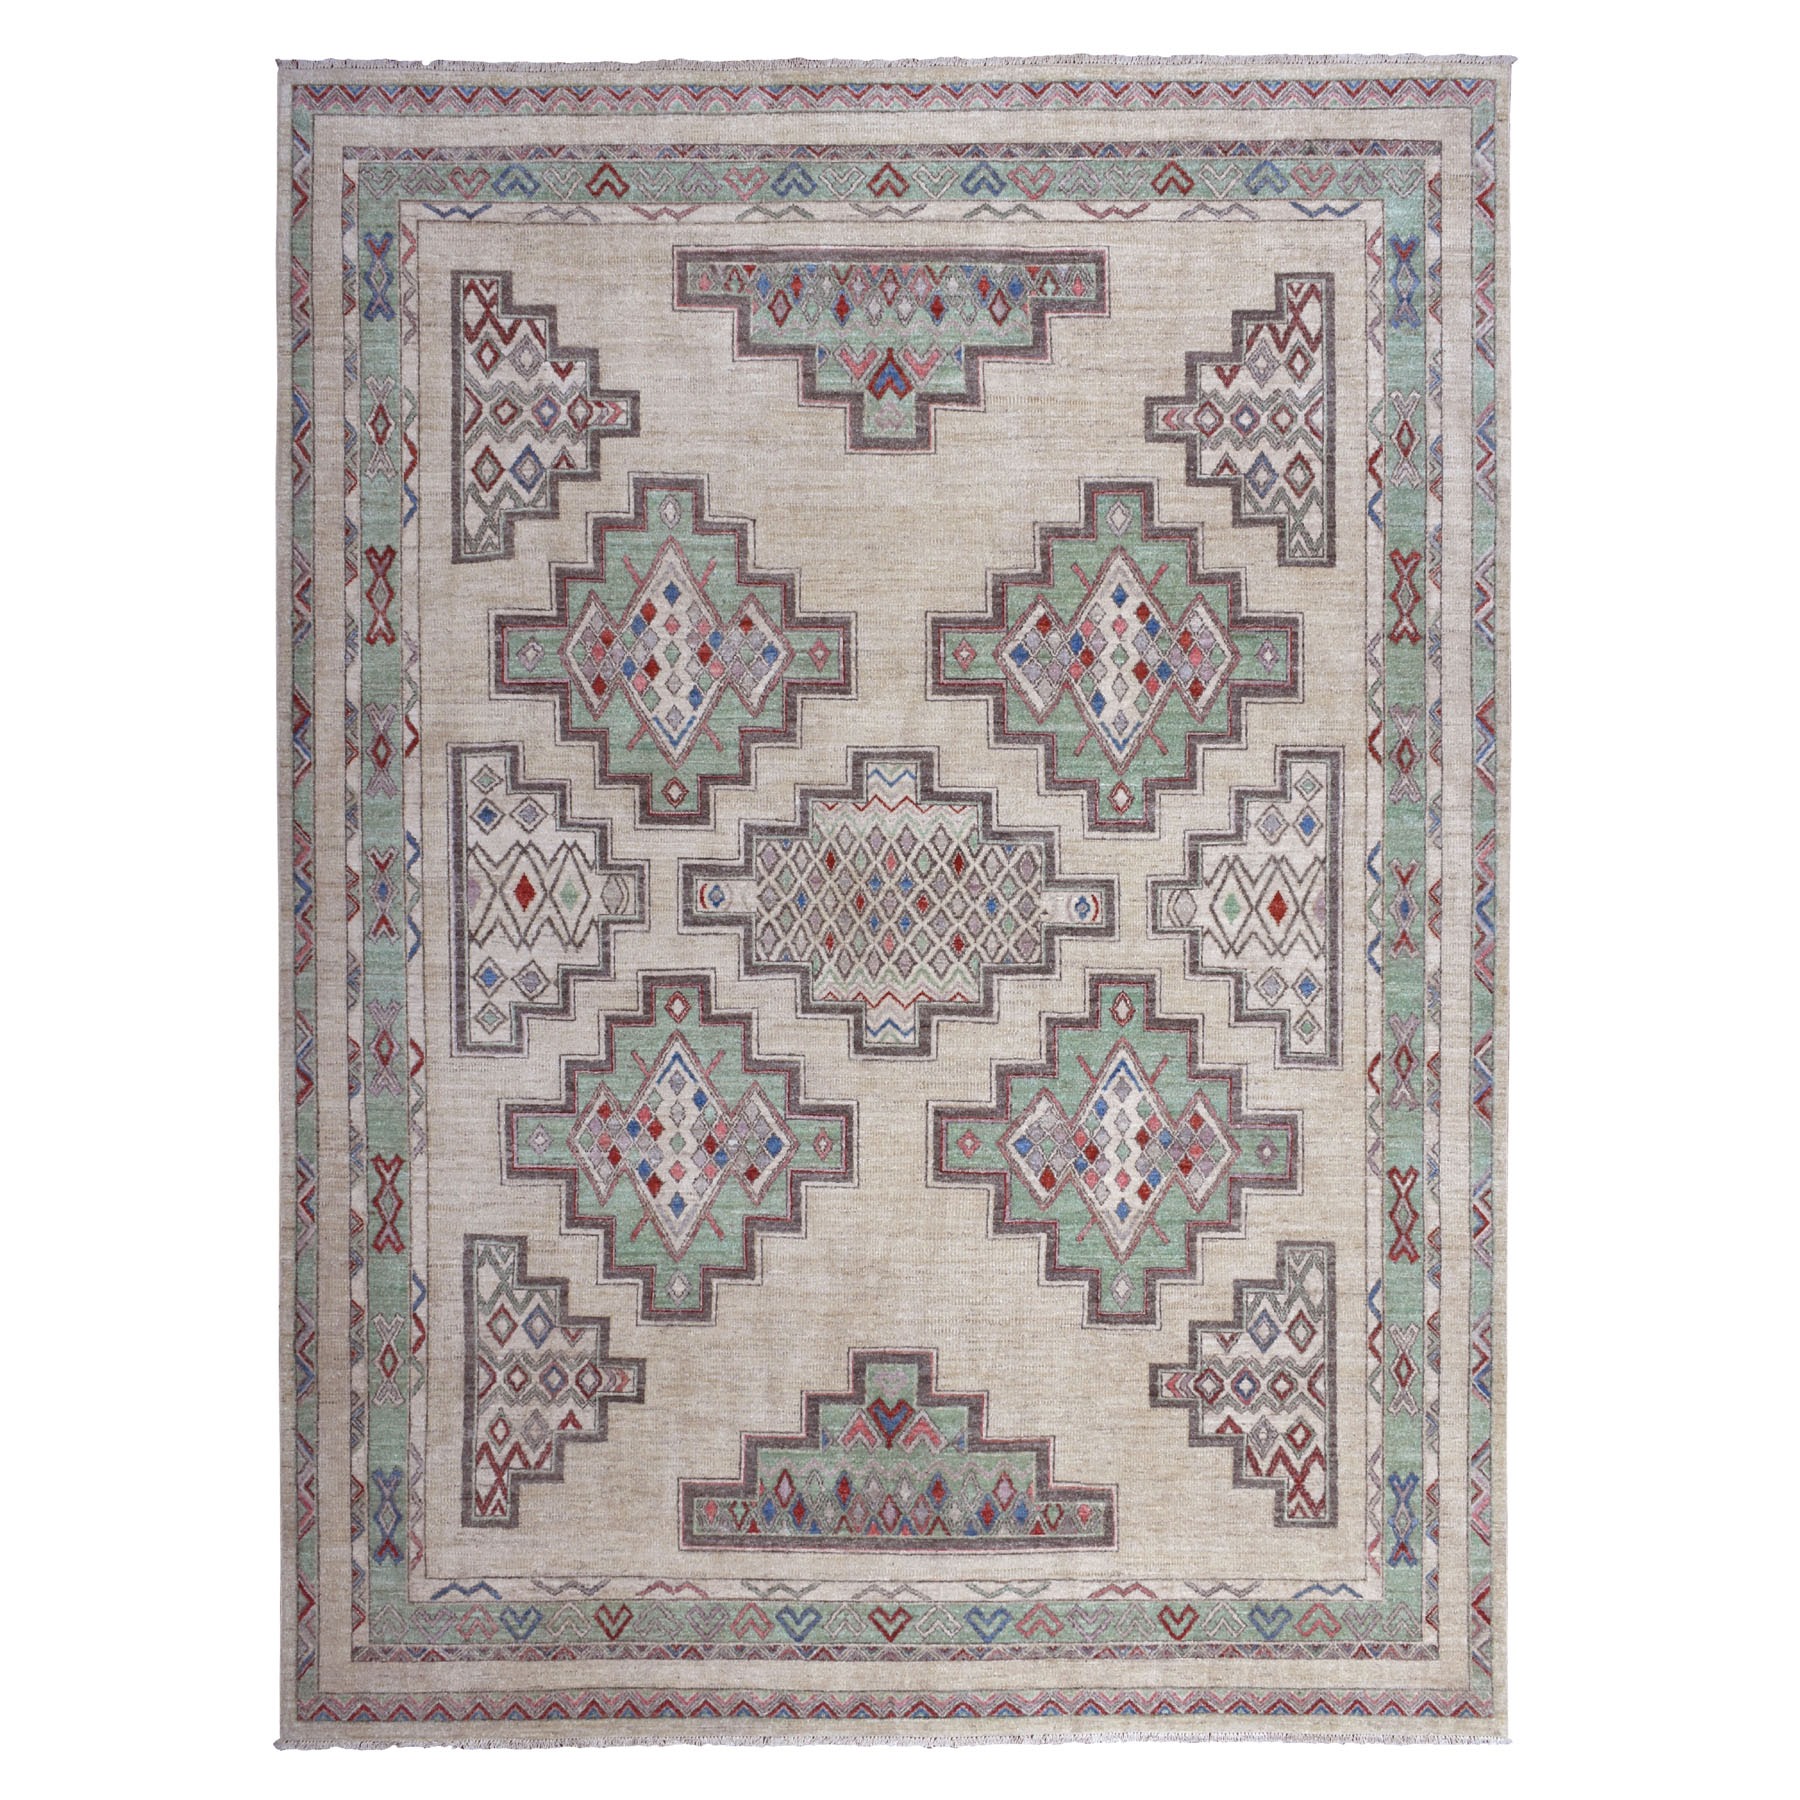 9'X11'10" Peshawar With Berber Motifs,Pop Of Color Pure Wool Hand Knotted Oriental Rug moaeb96a